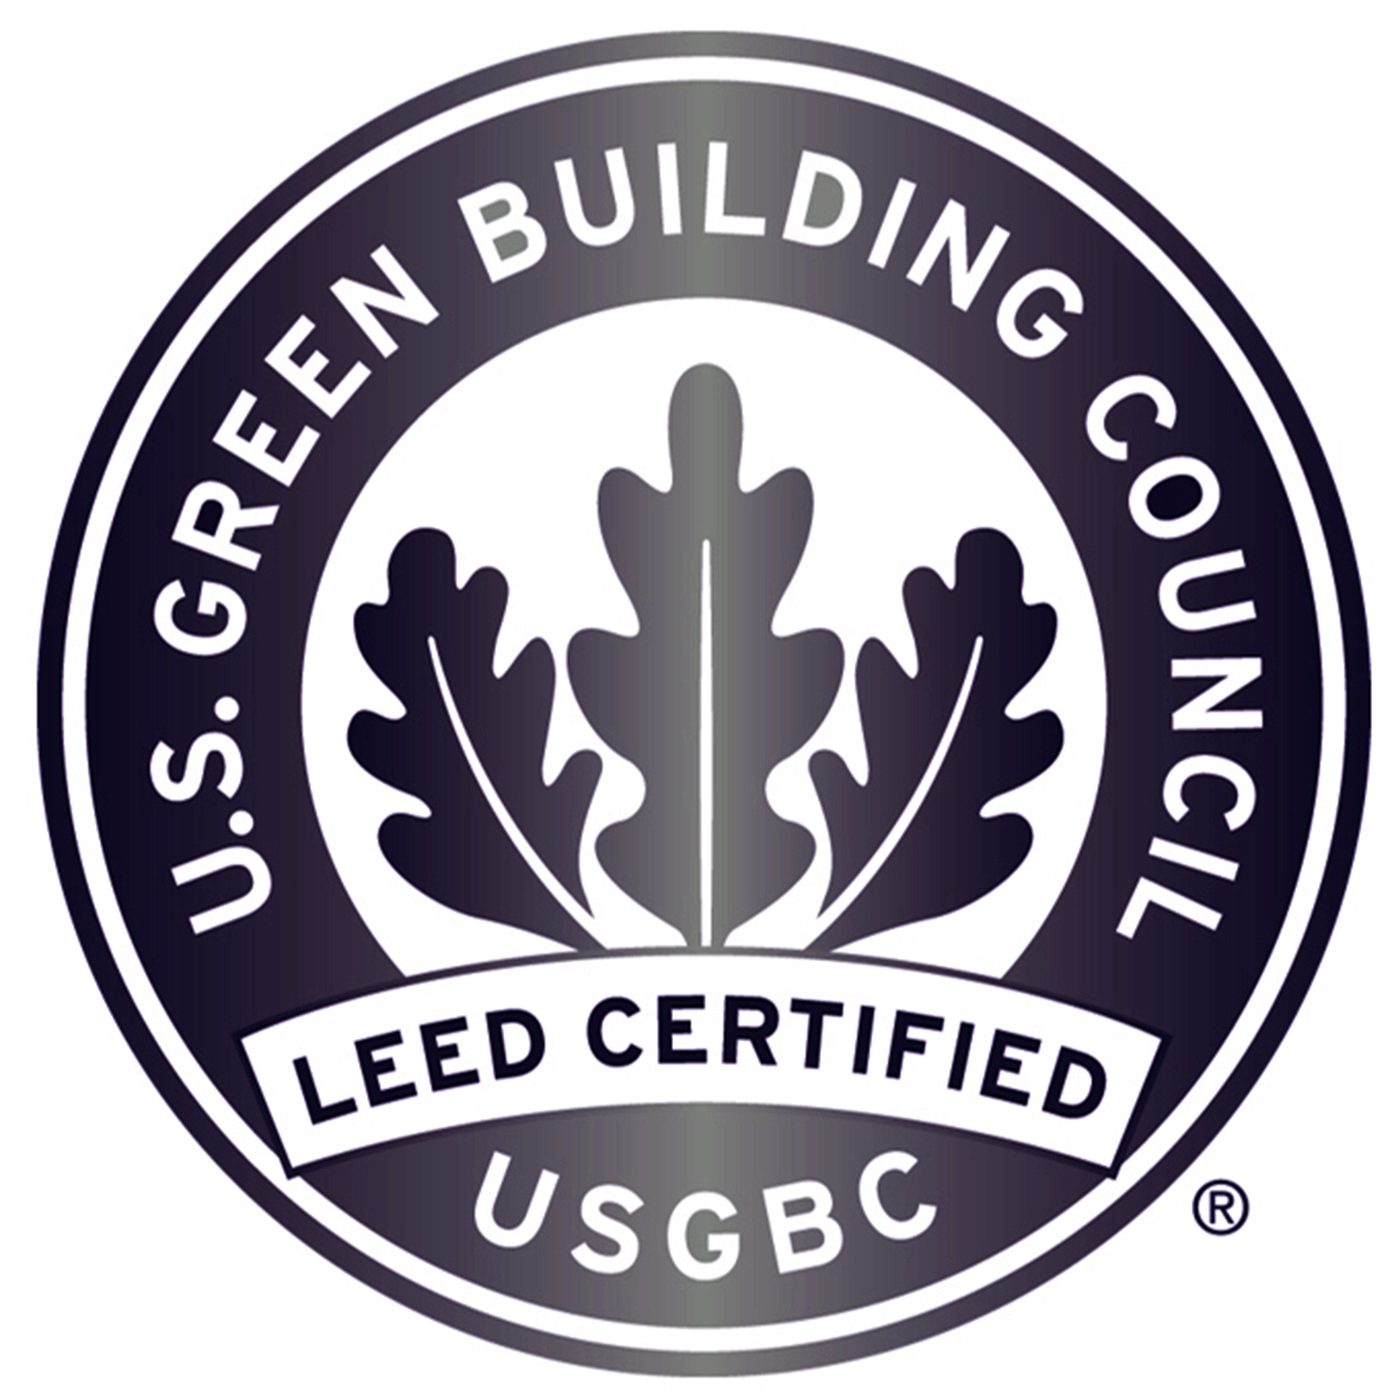 LEED Certified logo: LEED (Leadership in Energy and Environmental Design) is a certification process that spreads environmental awareness to architects and contractors when constructing buildings. The design incorporates energy-efficient, water-conserving buildings with sustainable materials.  There are four levels in which projects can be rated:  Platinum (80+ points earned) Gold (60-79 points earned) Silver (50-59 points earned) Certified (40-49 points earned)